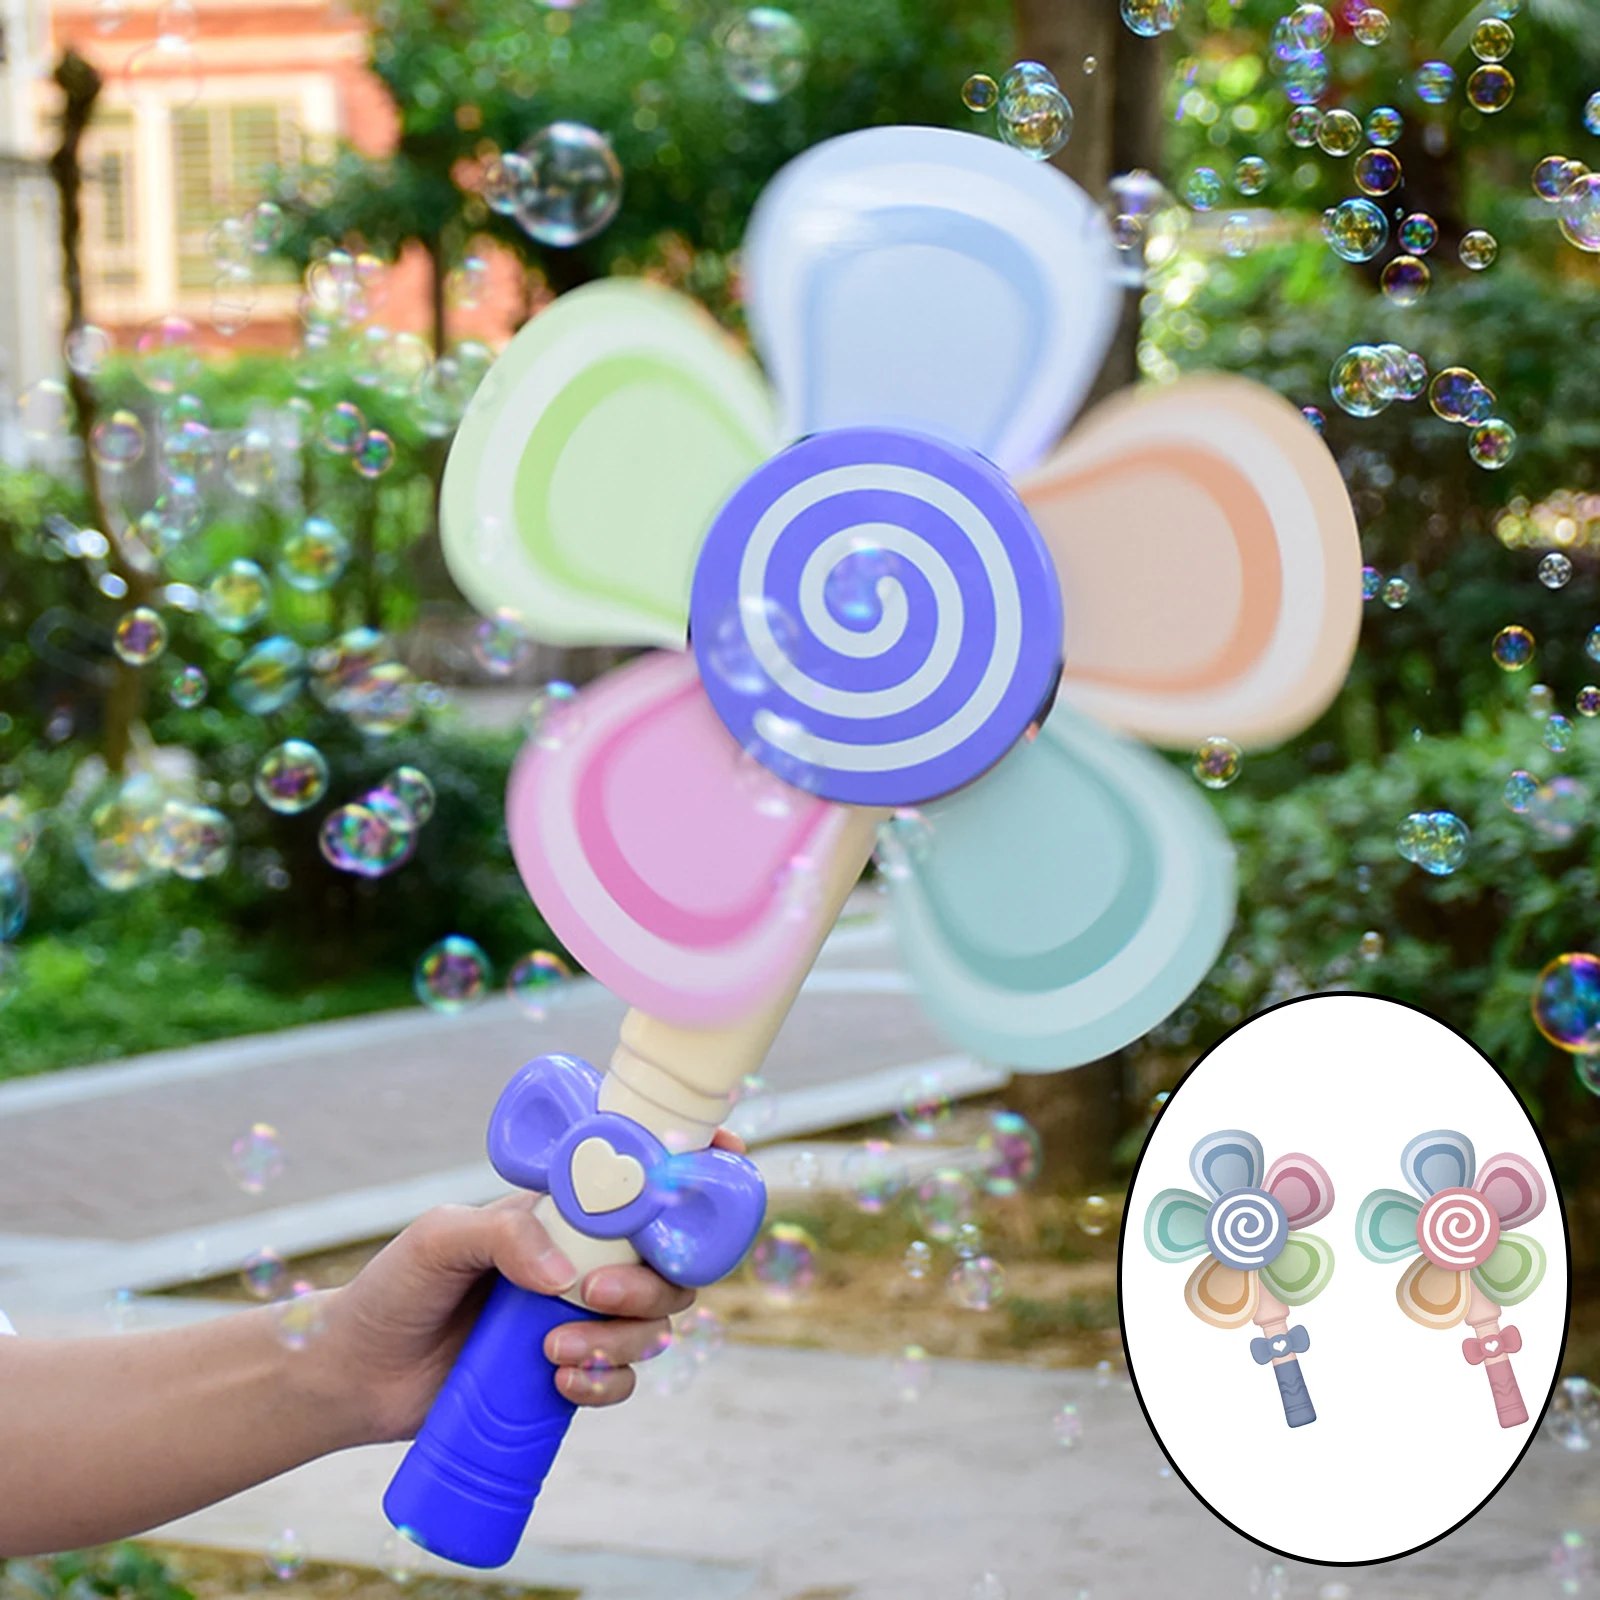 Toddler Cute Funny Electric Windmill Bubble Maker Blower Machine with Music & Lights Summer Birthday Garden Activity Toys